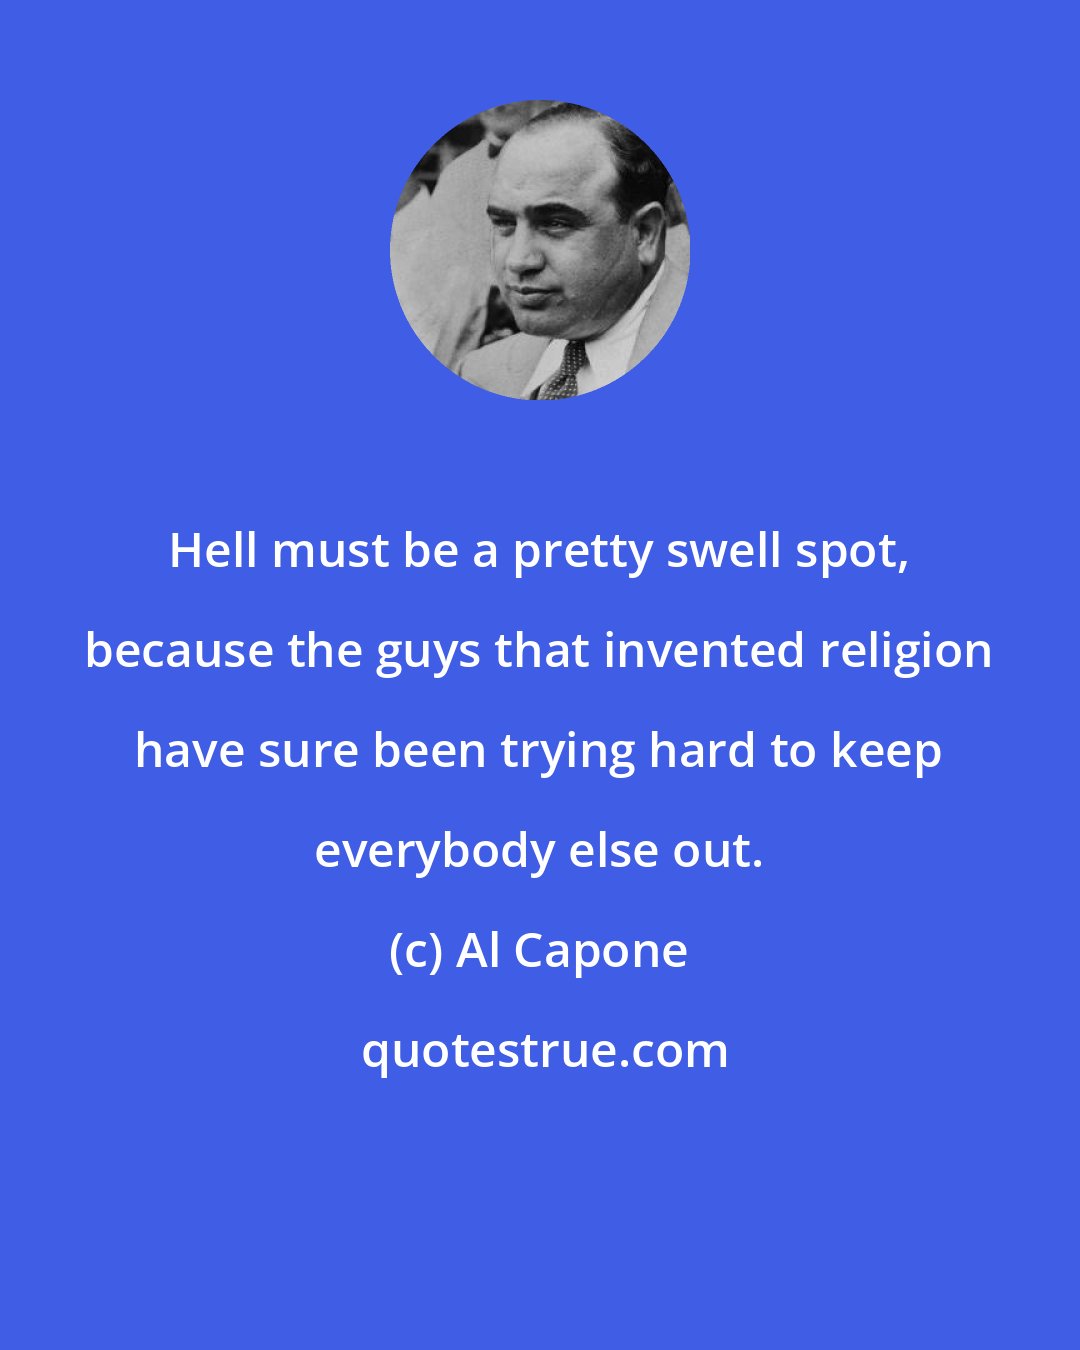 Al Capone: Hell must be a pretty swell spot, because the guys that invented religion have sure been trying hard to keep everybody else out.